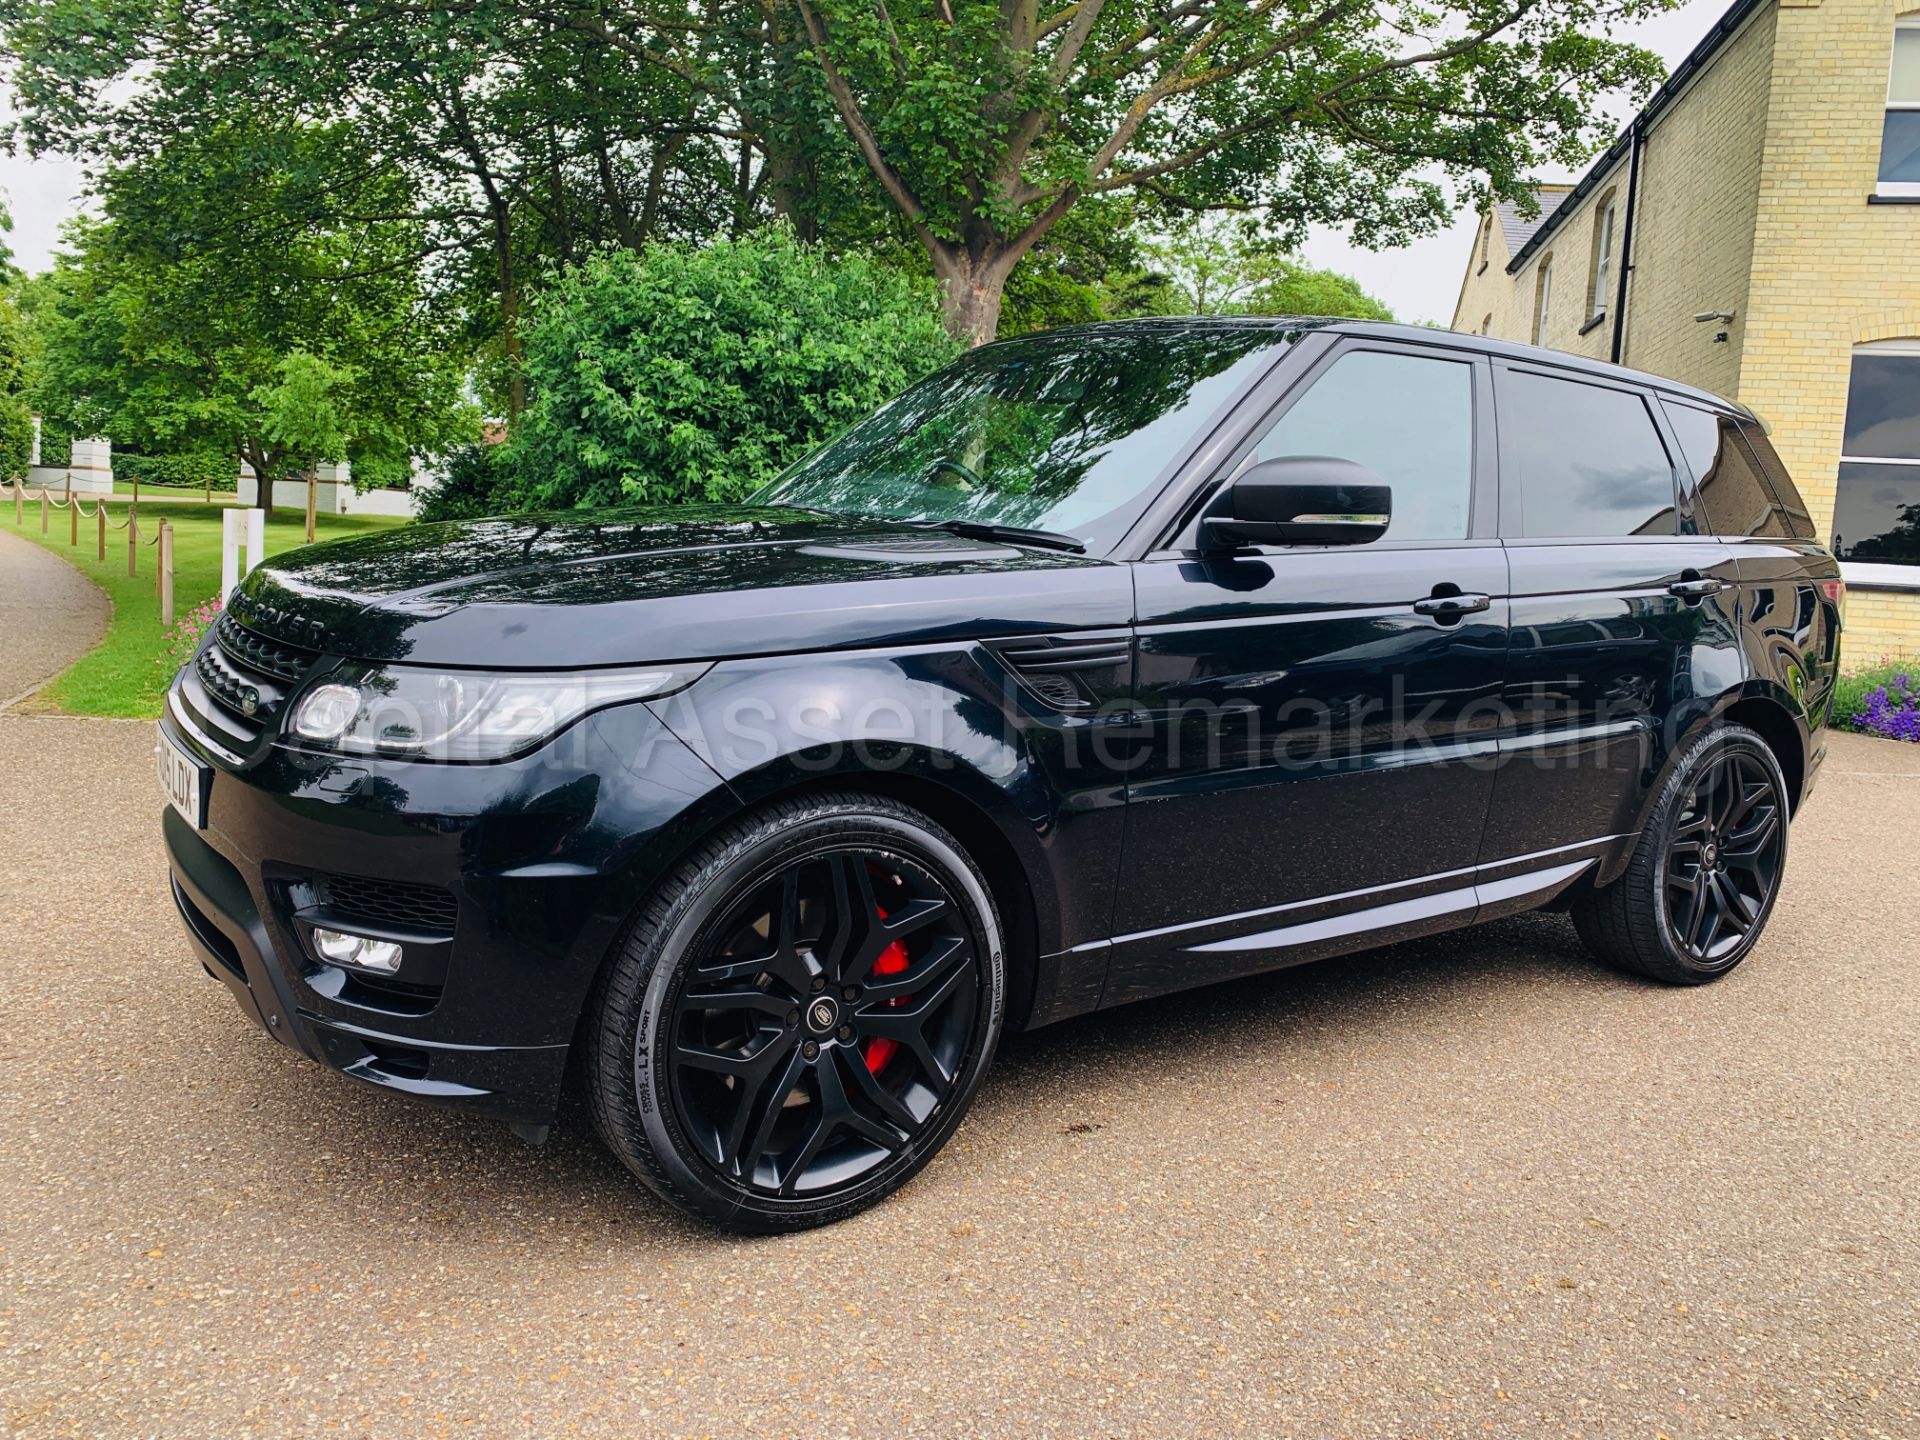 (On Sale) RANGE ROVER SPORT *AUTOBIOGRAPHY DYNAMIC* (2015) '4.4 SDV8 8 SPEED AUTO' **ULTIMATE SPEC** - Image 4 of 83